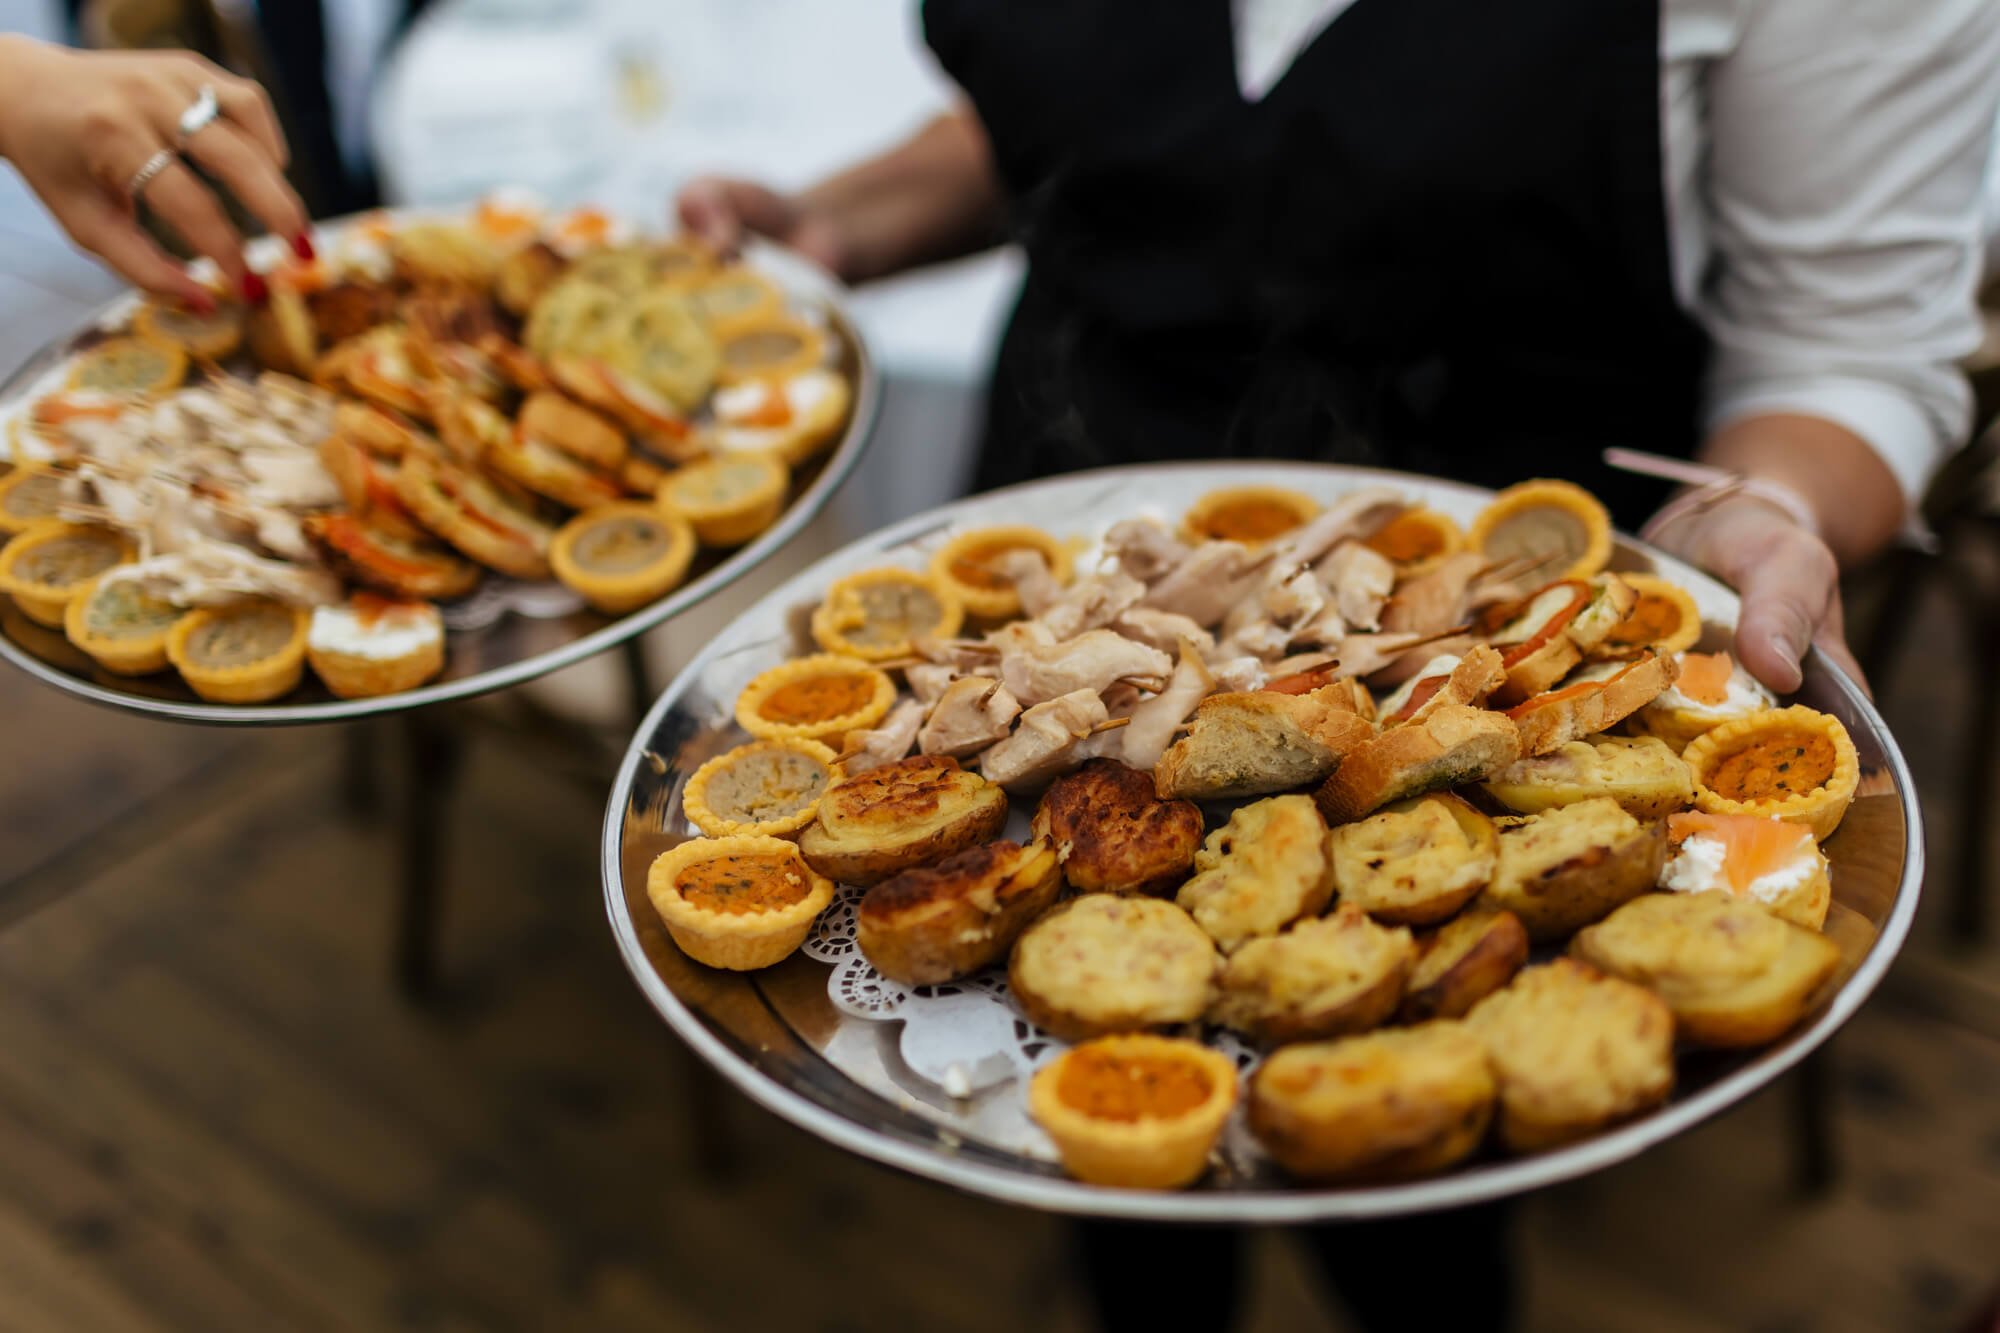 Canapes being served by the caterers